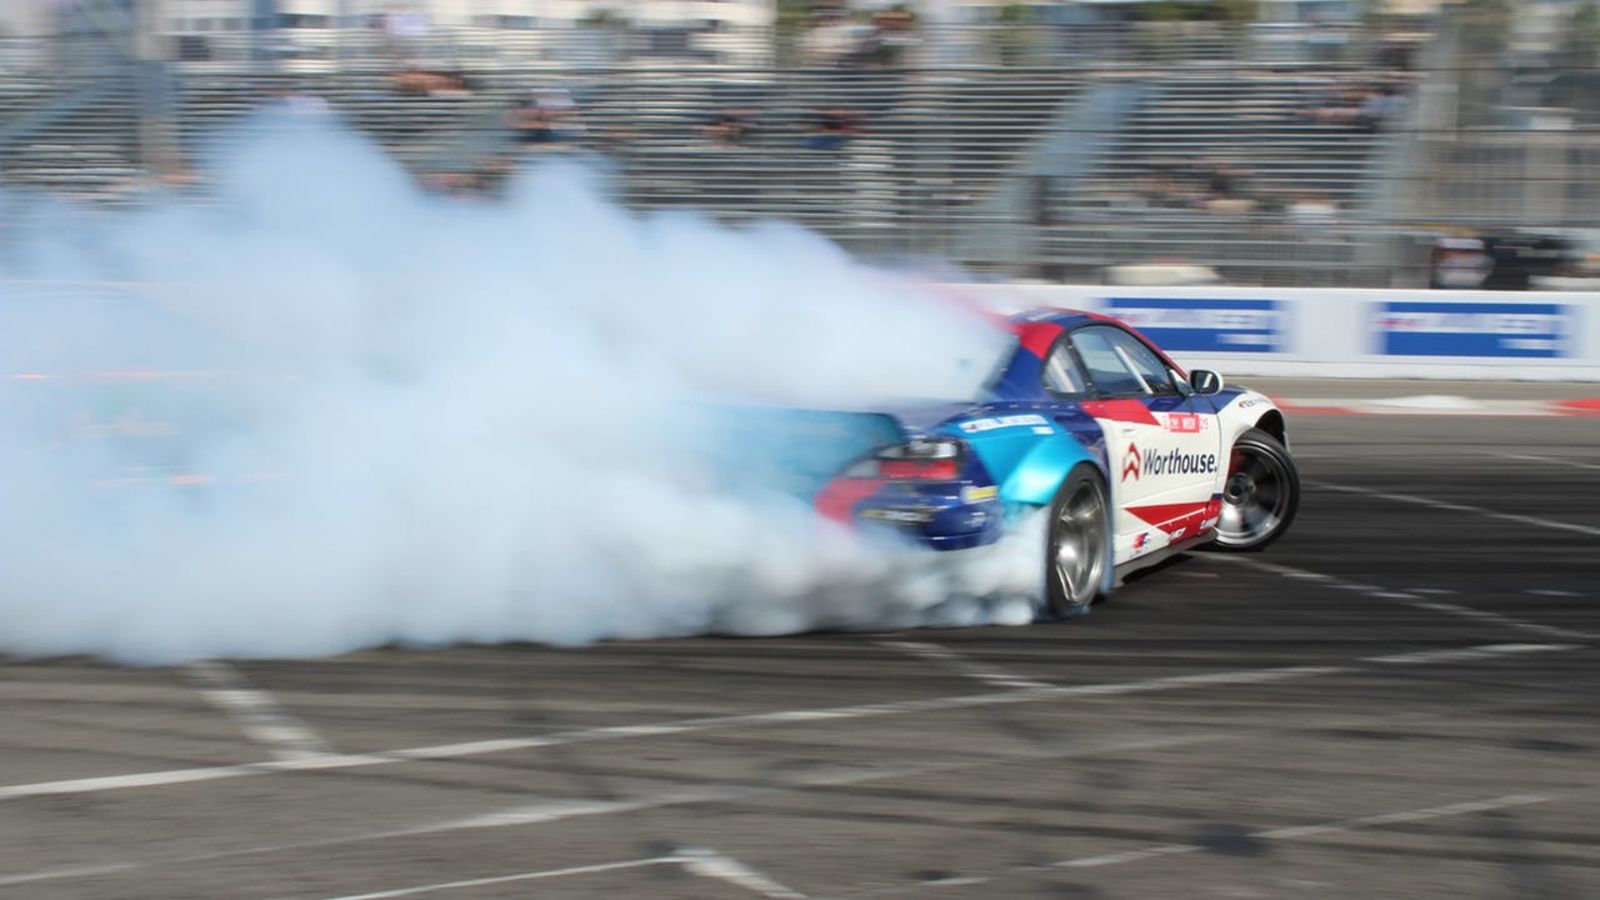 Illustration for article titled Formula Drift Long Beach is Canceled, Take a Look Back at 2019